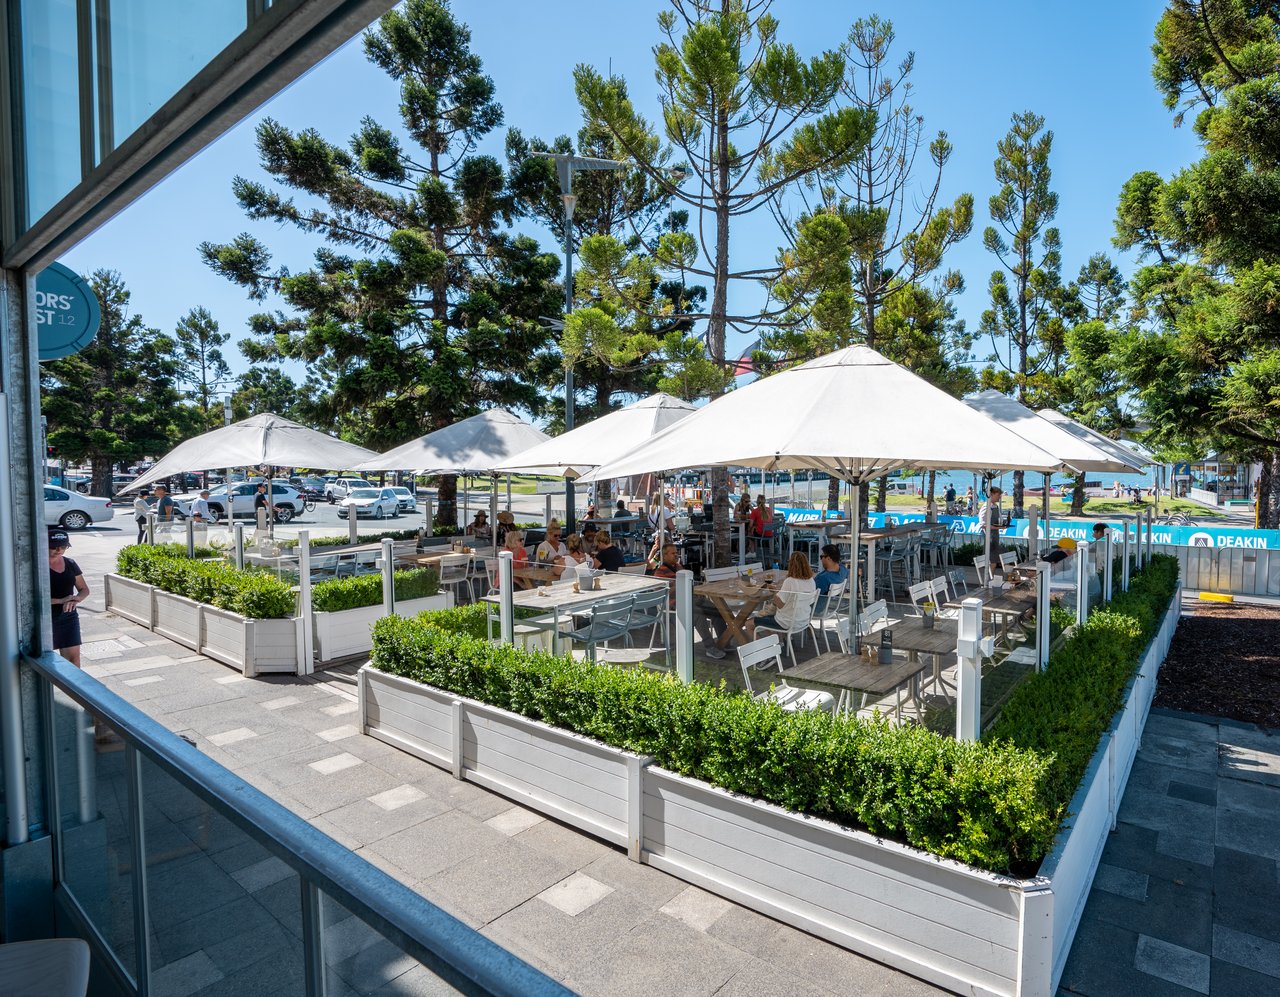 Sailors Rest al fresco terrace, with umbrellas, tables and views of the bay.